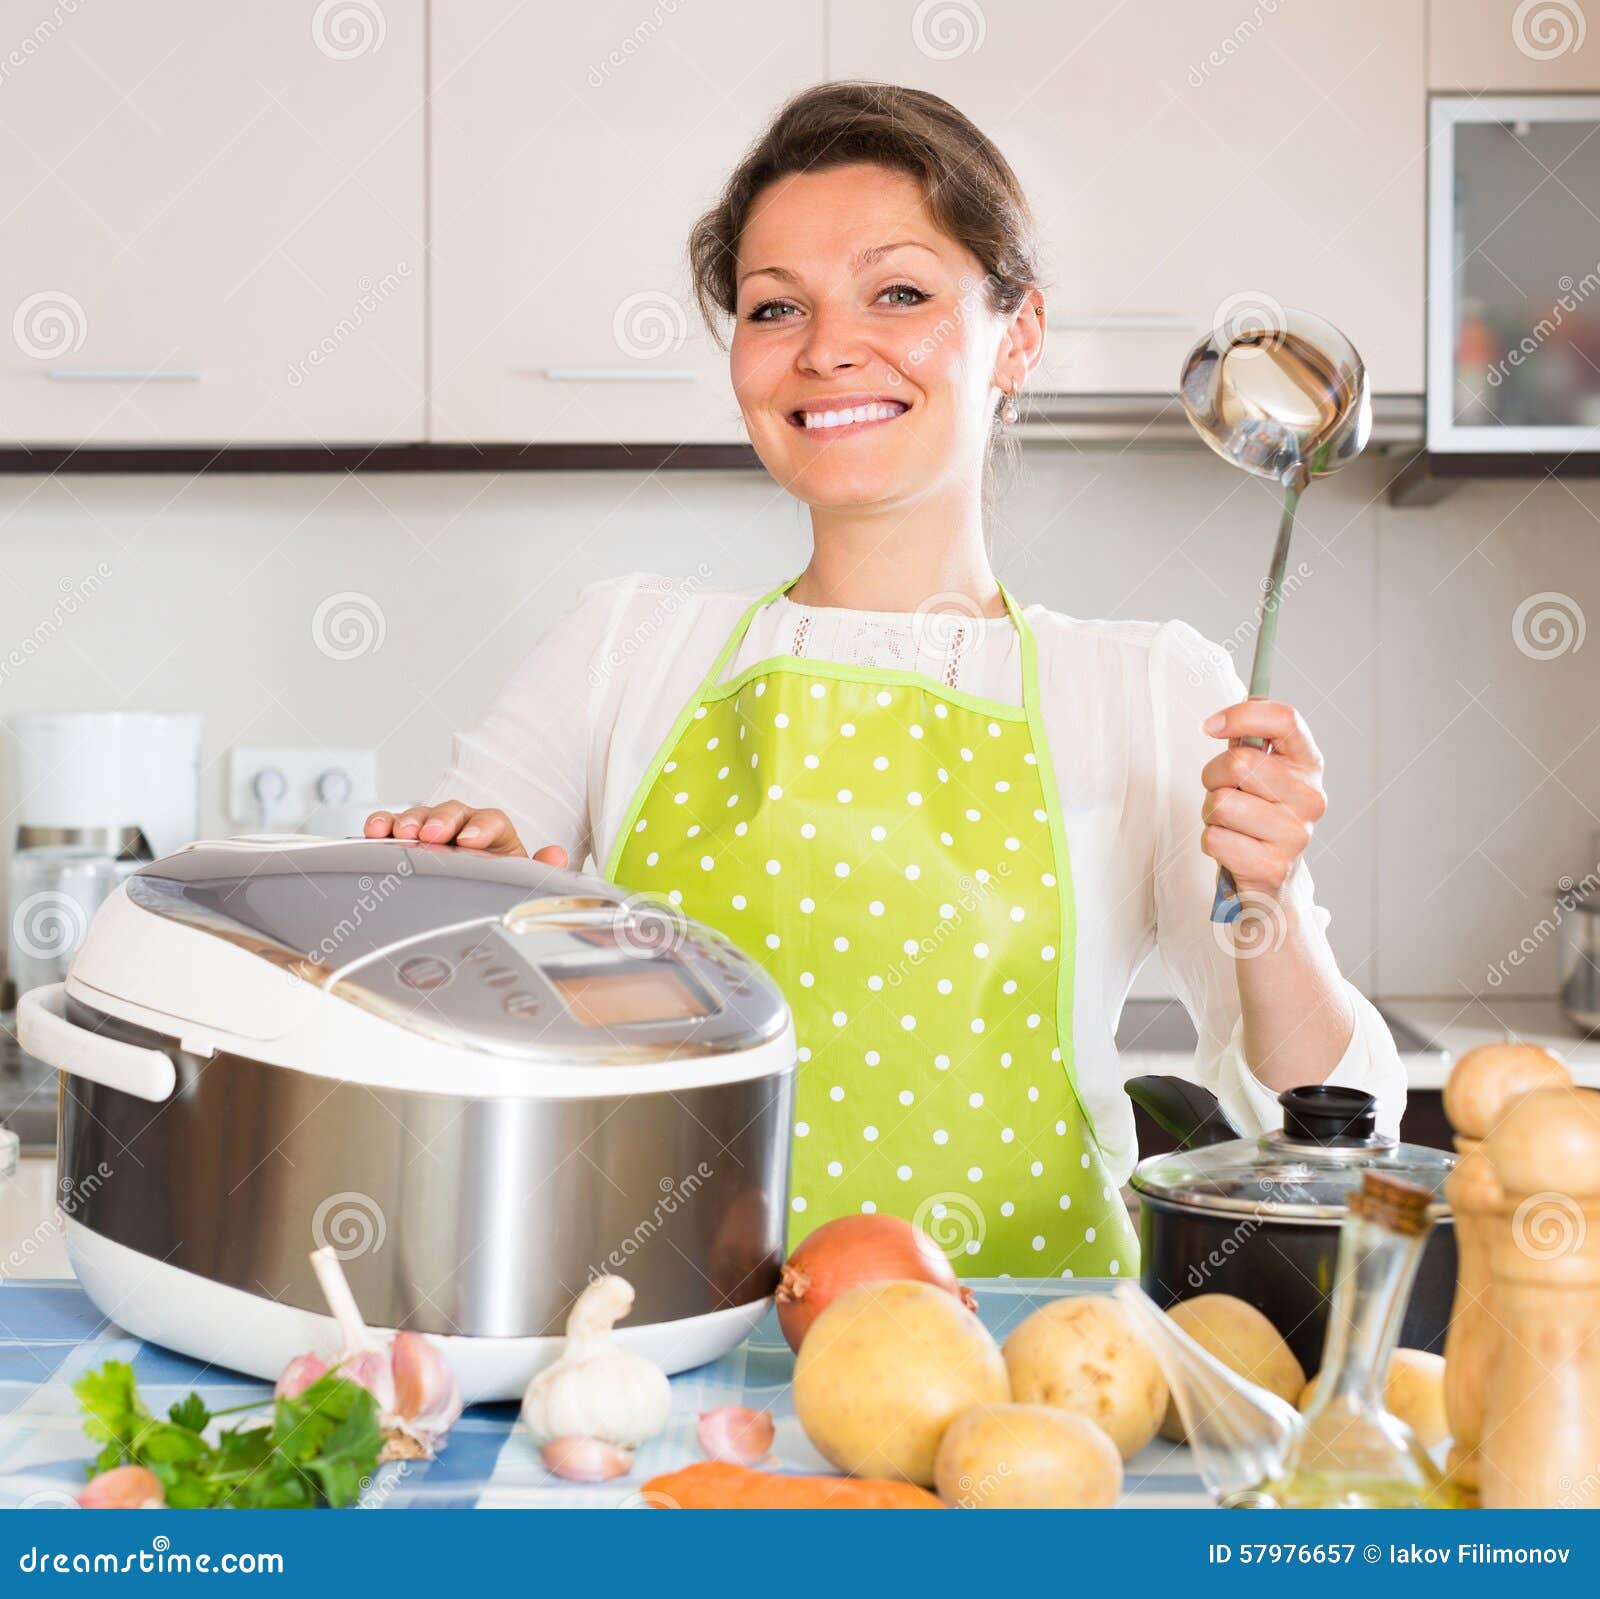 Housewife Cooking With Multicooker Stock Image I